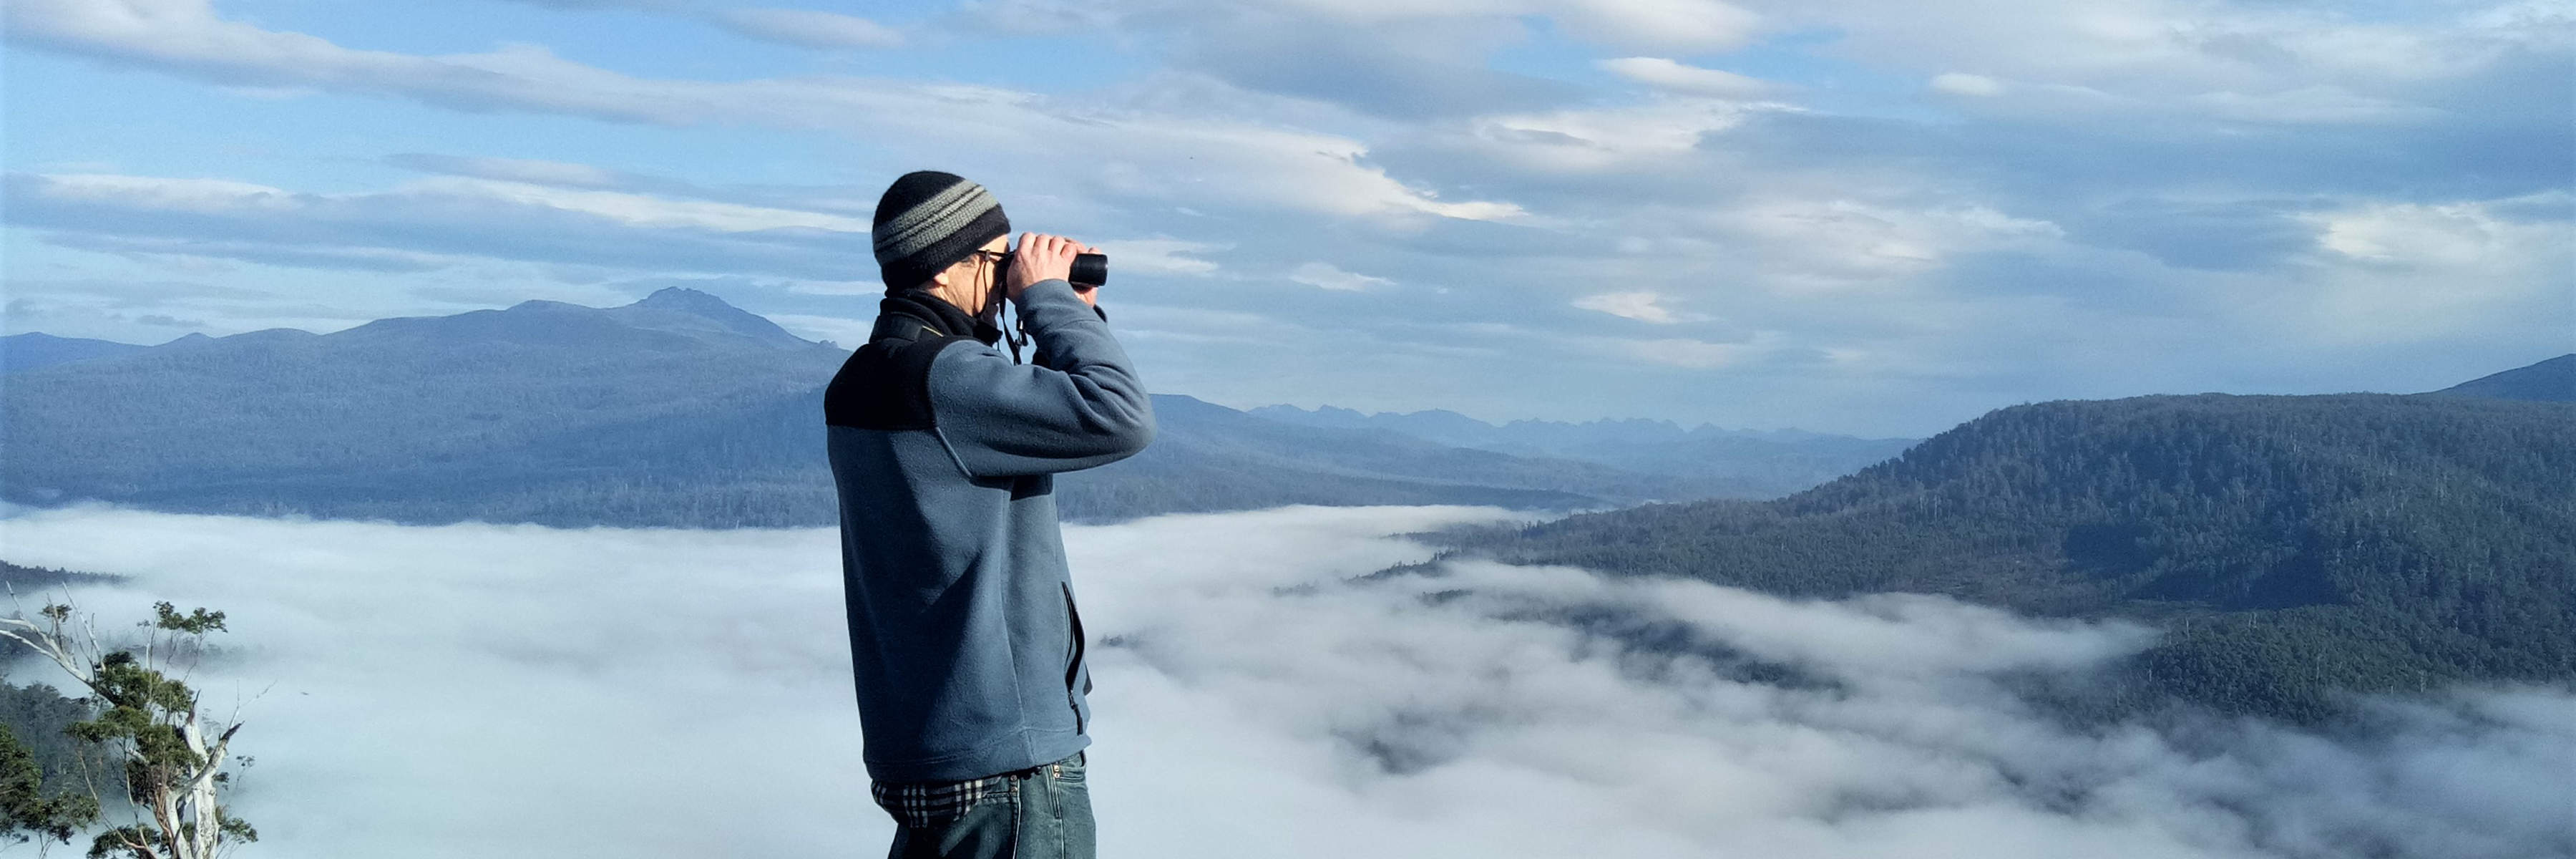 A warmly-dressed man with distant mountains behind him stands on the edge of a slope into a cloud-filled valley, surveying for Where? Where? Wedgie! He directs his binoculars to the right of the photo. Photo: Heidi Krajewsky.